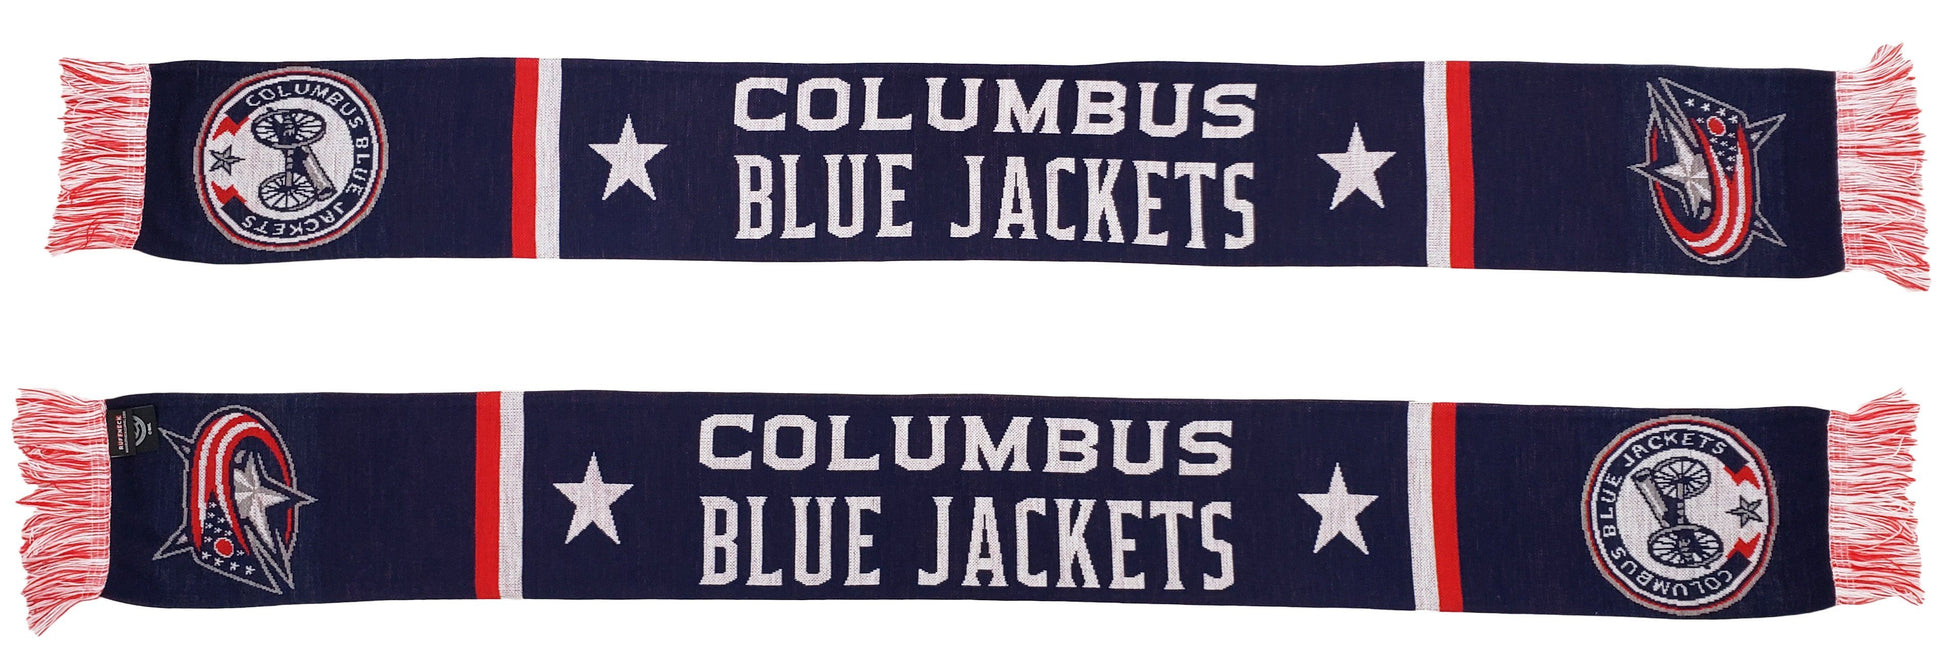 COLUMBUS BLUE JACKETS SCARF - Home Jersey (HD Knit)